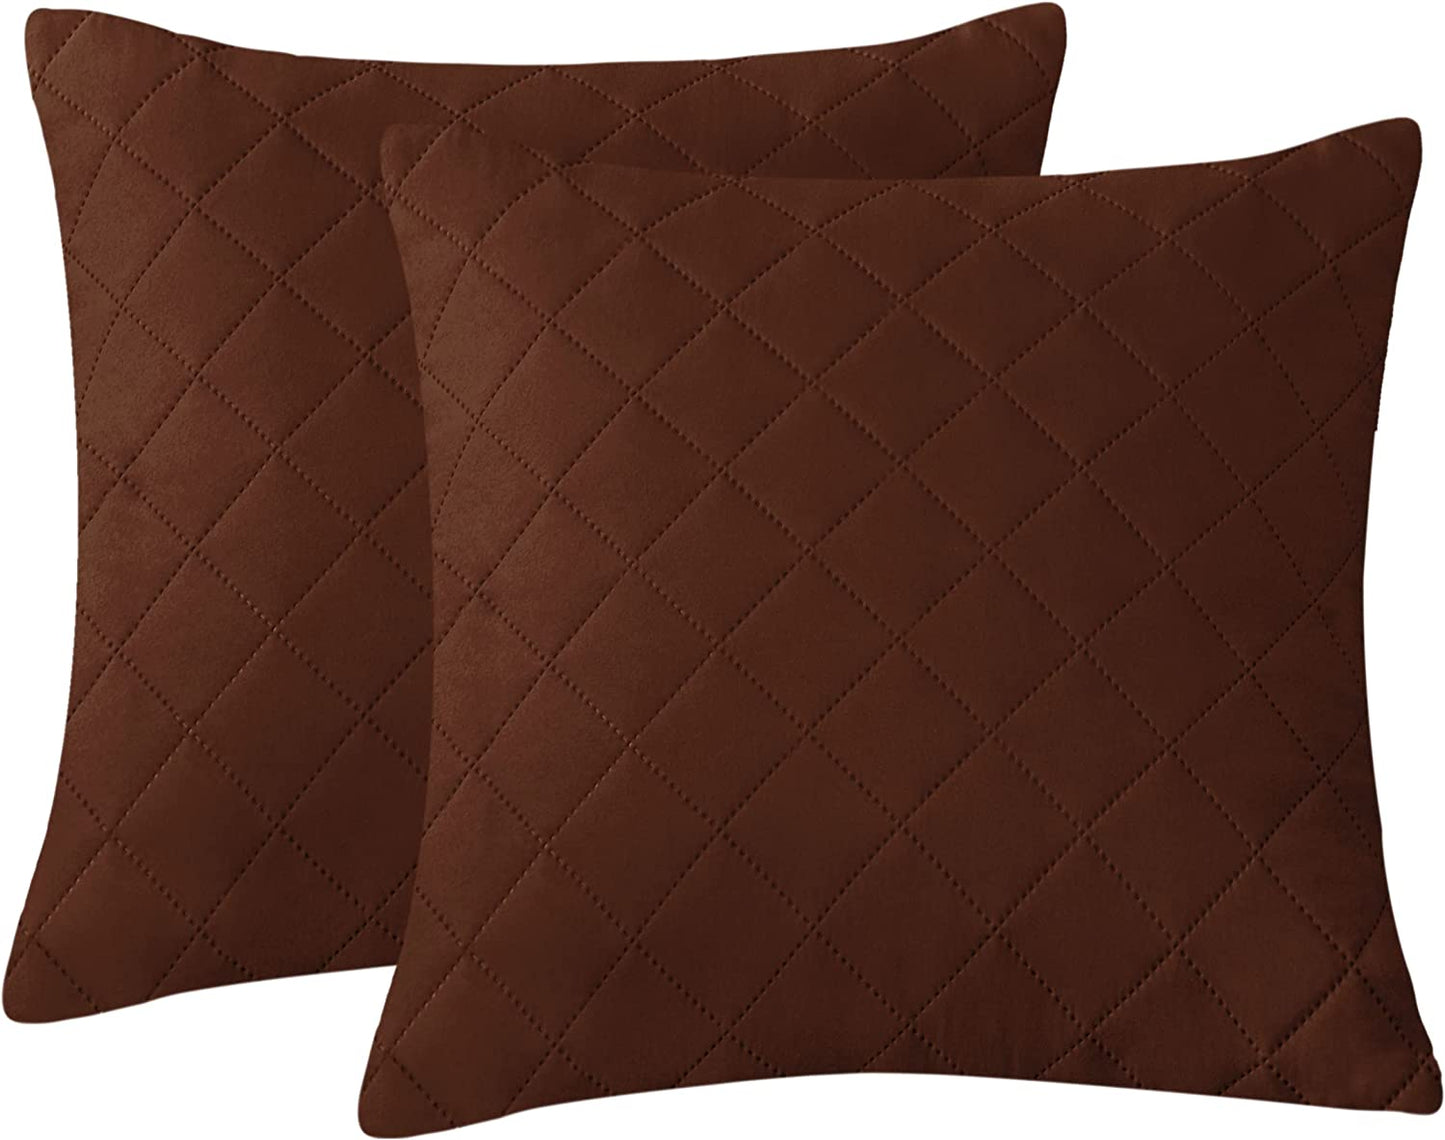 Quilted Cushion Cover Square Pattren 16"x16"Cofee